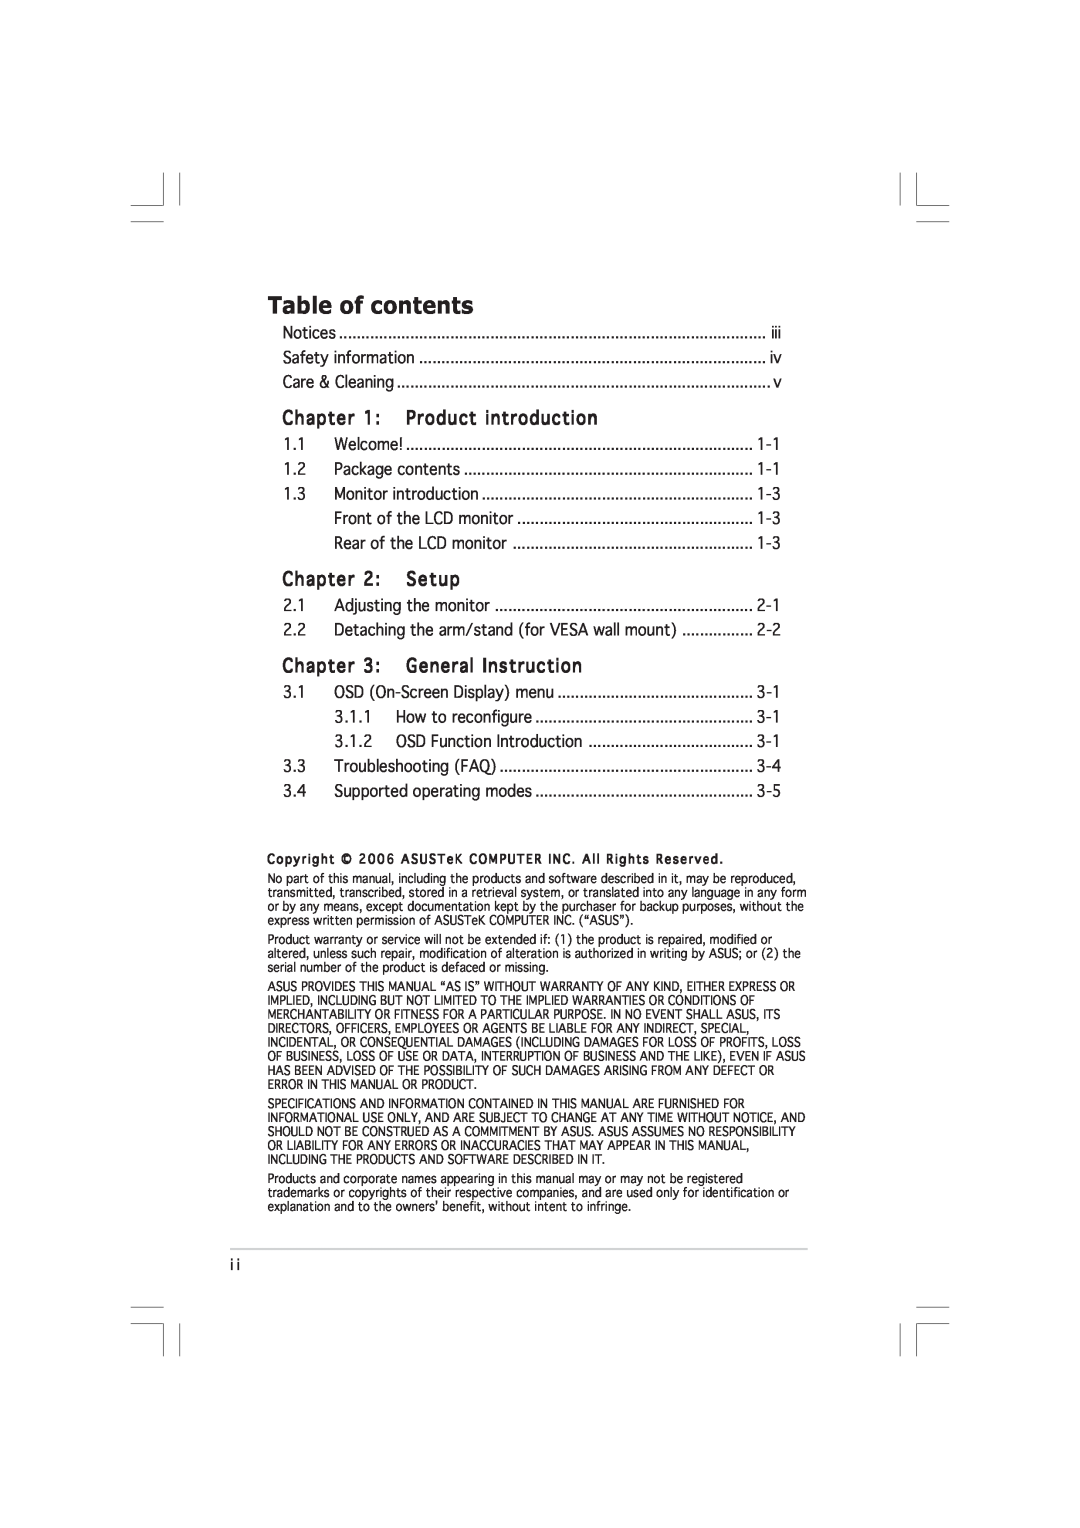 Asus VW191D manual Table of contents, Product introduction, Chapter, Setup, General Instruction 